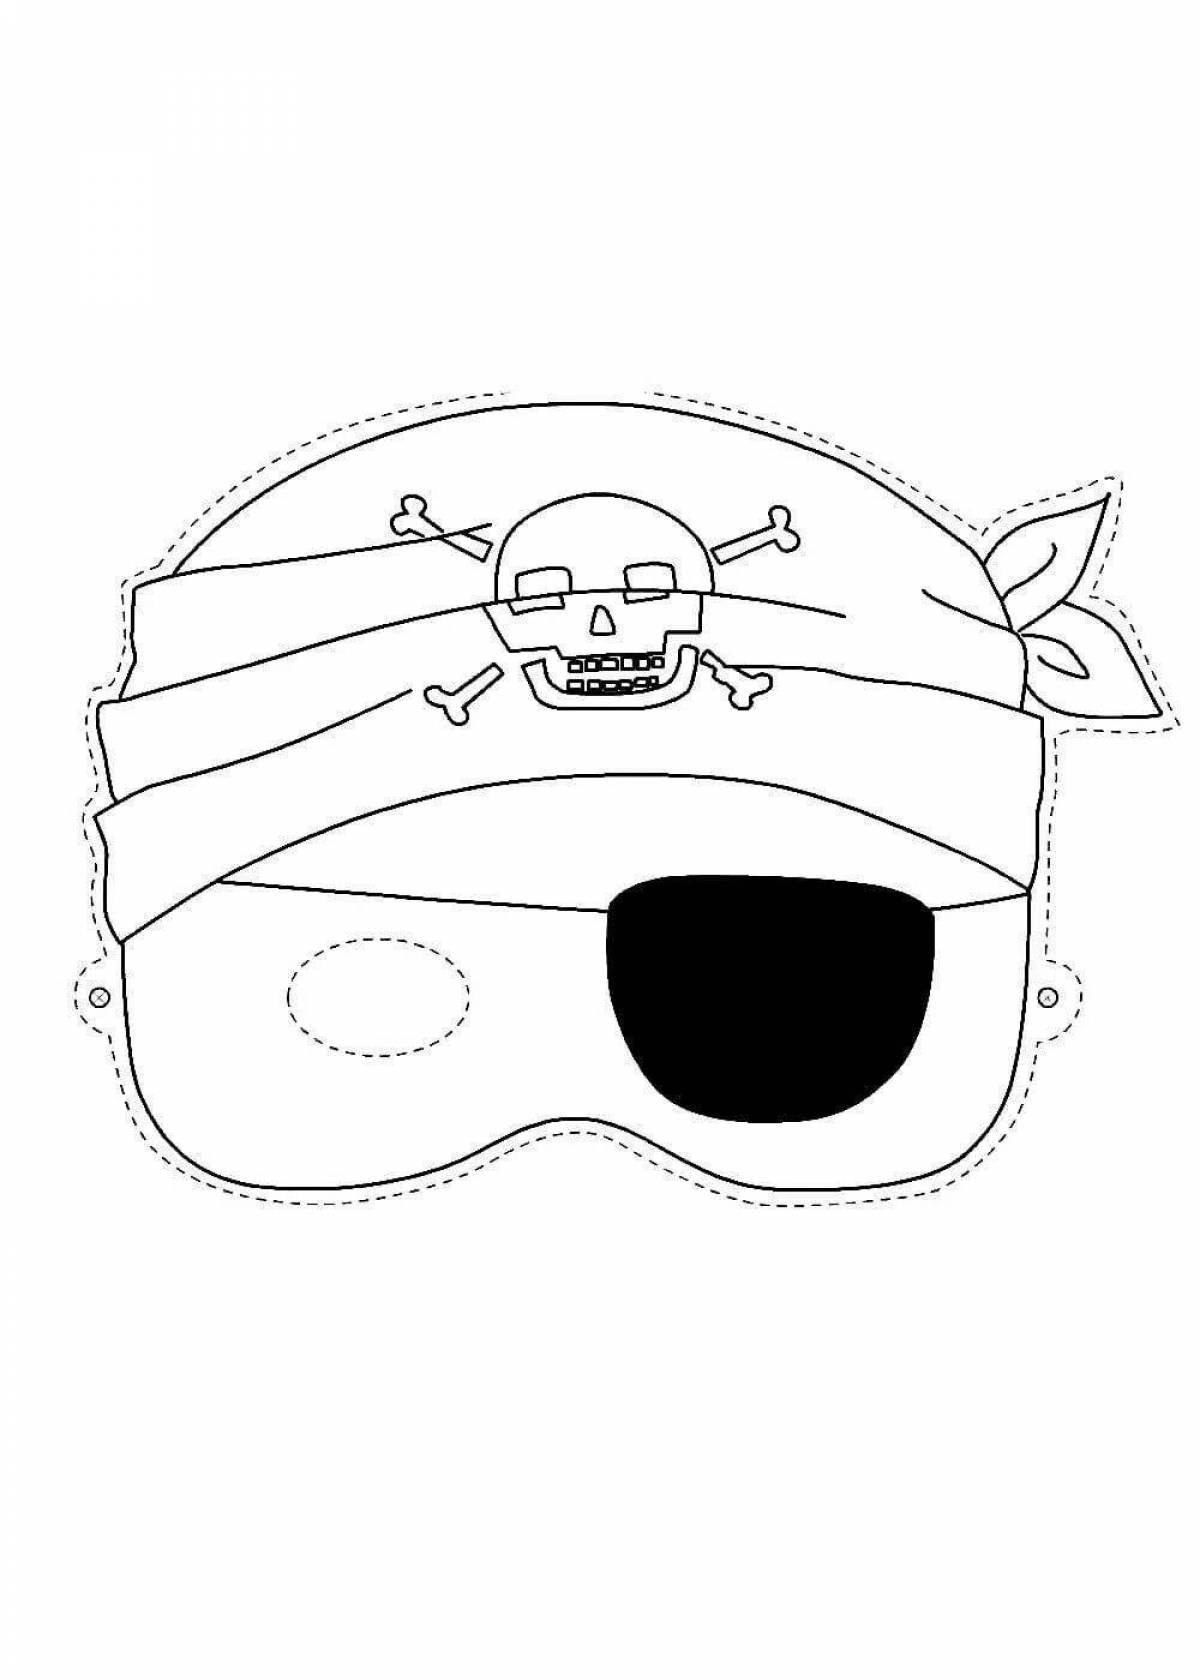 Exciting sleep mask coloring book